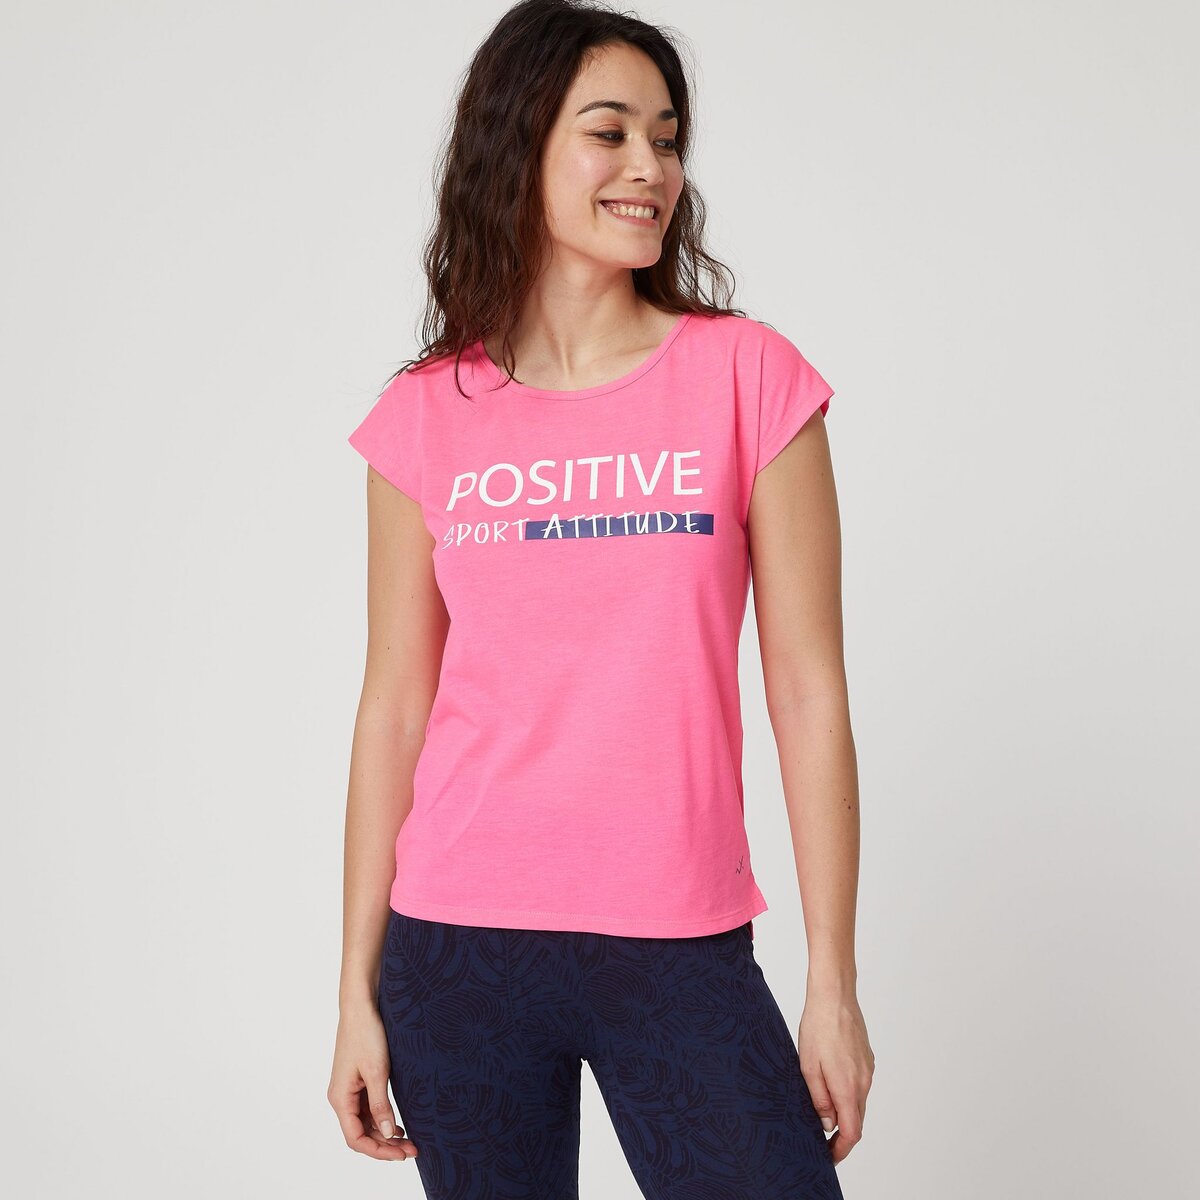 IN EXTENSO T-shirt manches courtes rose femme